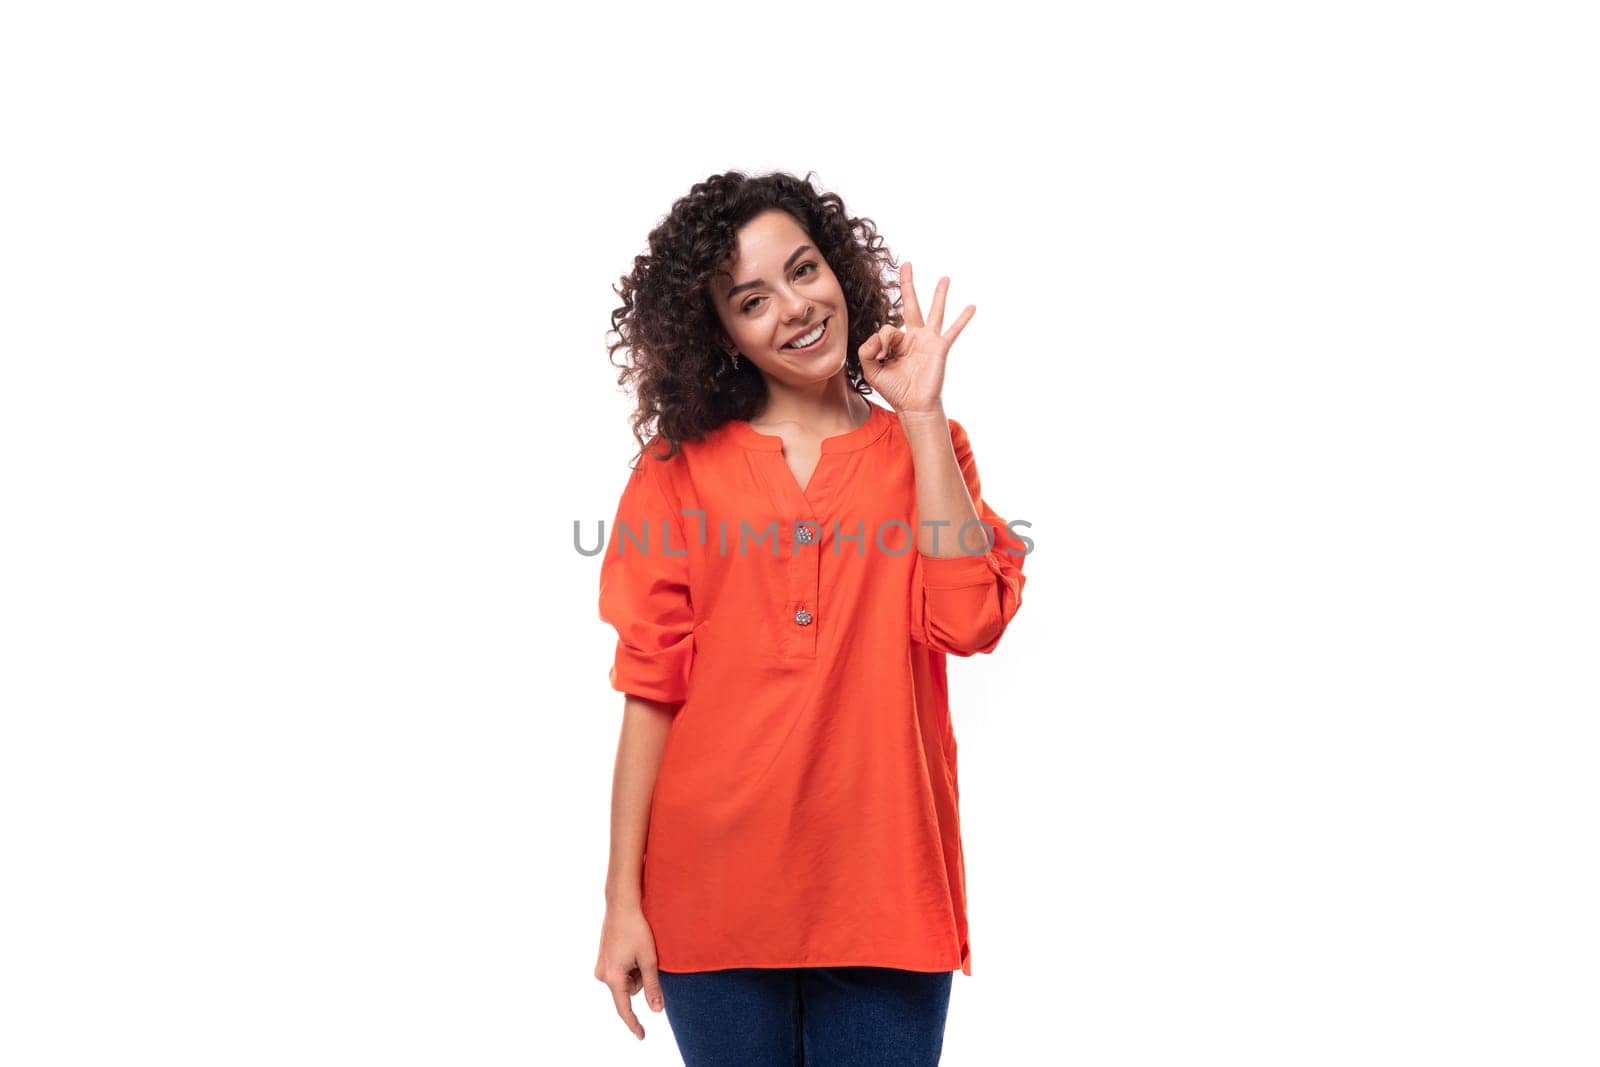 young european woman with curly black hair keeps dressed in a bright orange blouse works as an advertiser in the studio by TRMK